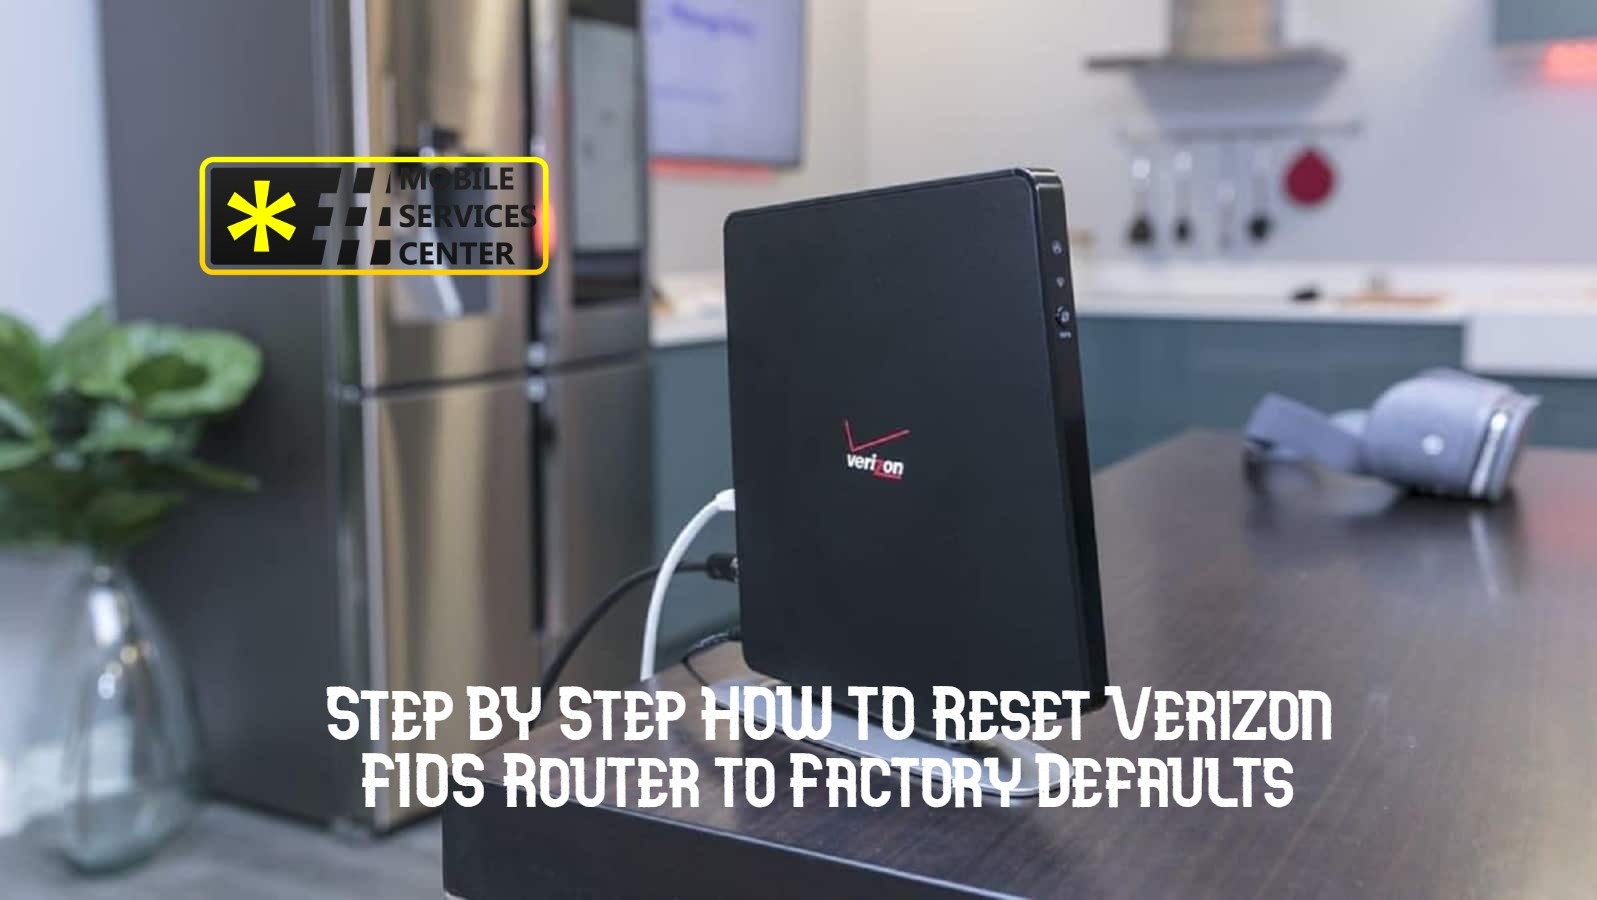 Step BY Step HOW TO Reset Verizon FIOS Router to Factory Defaults